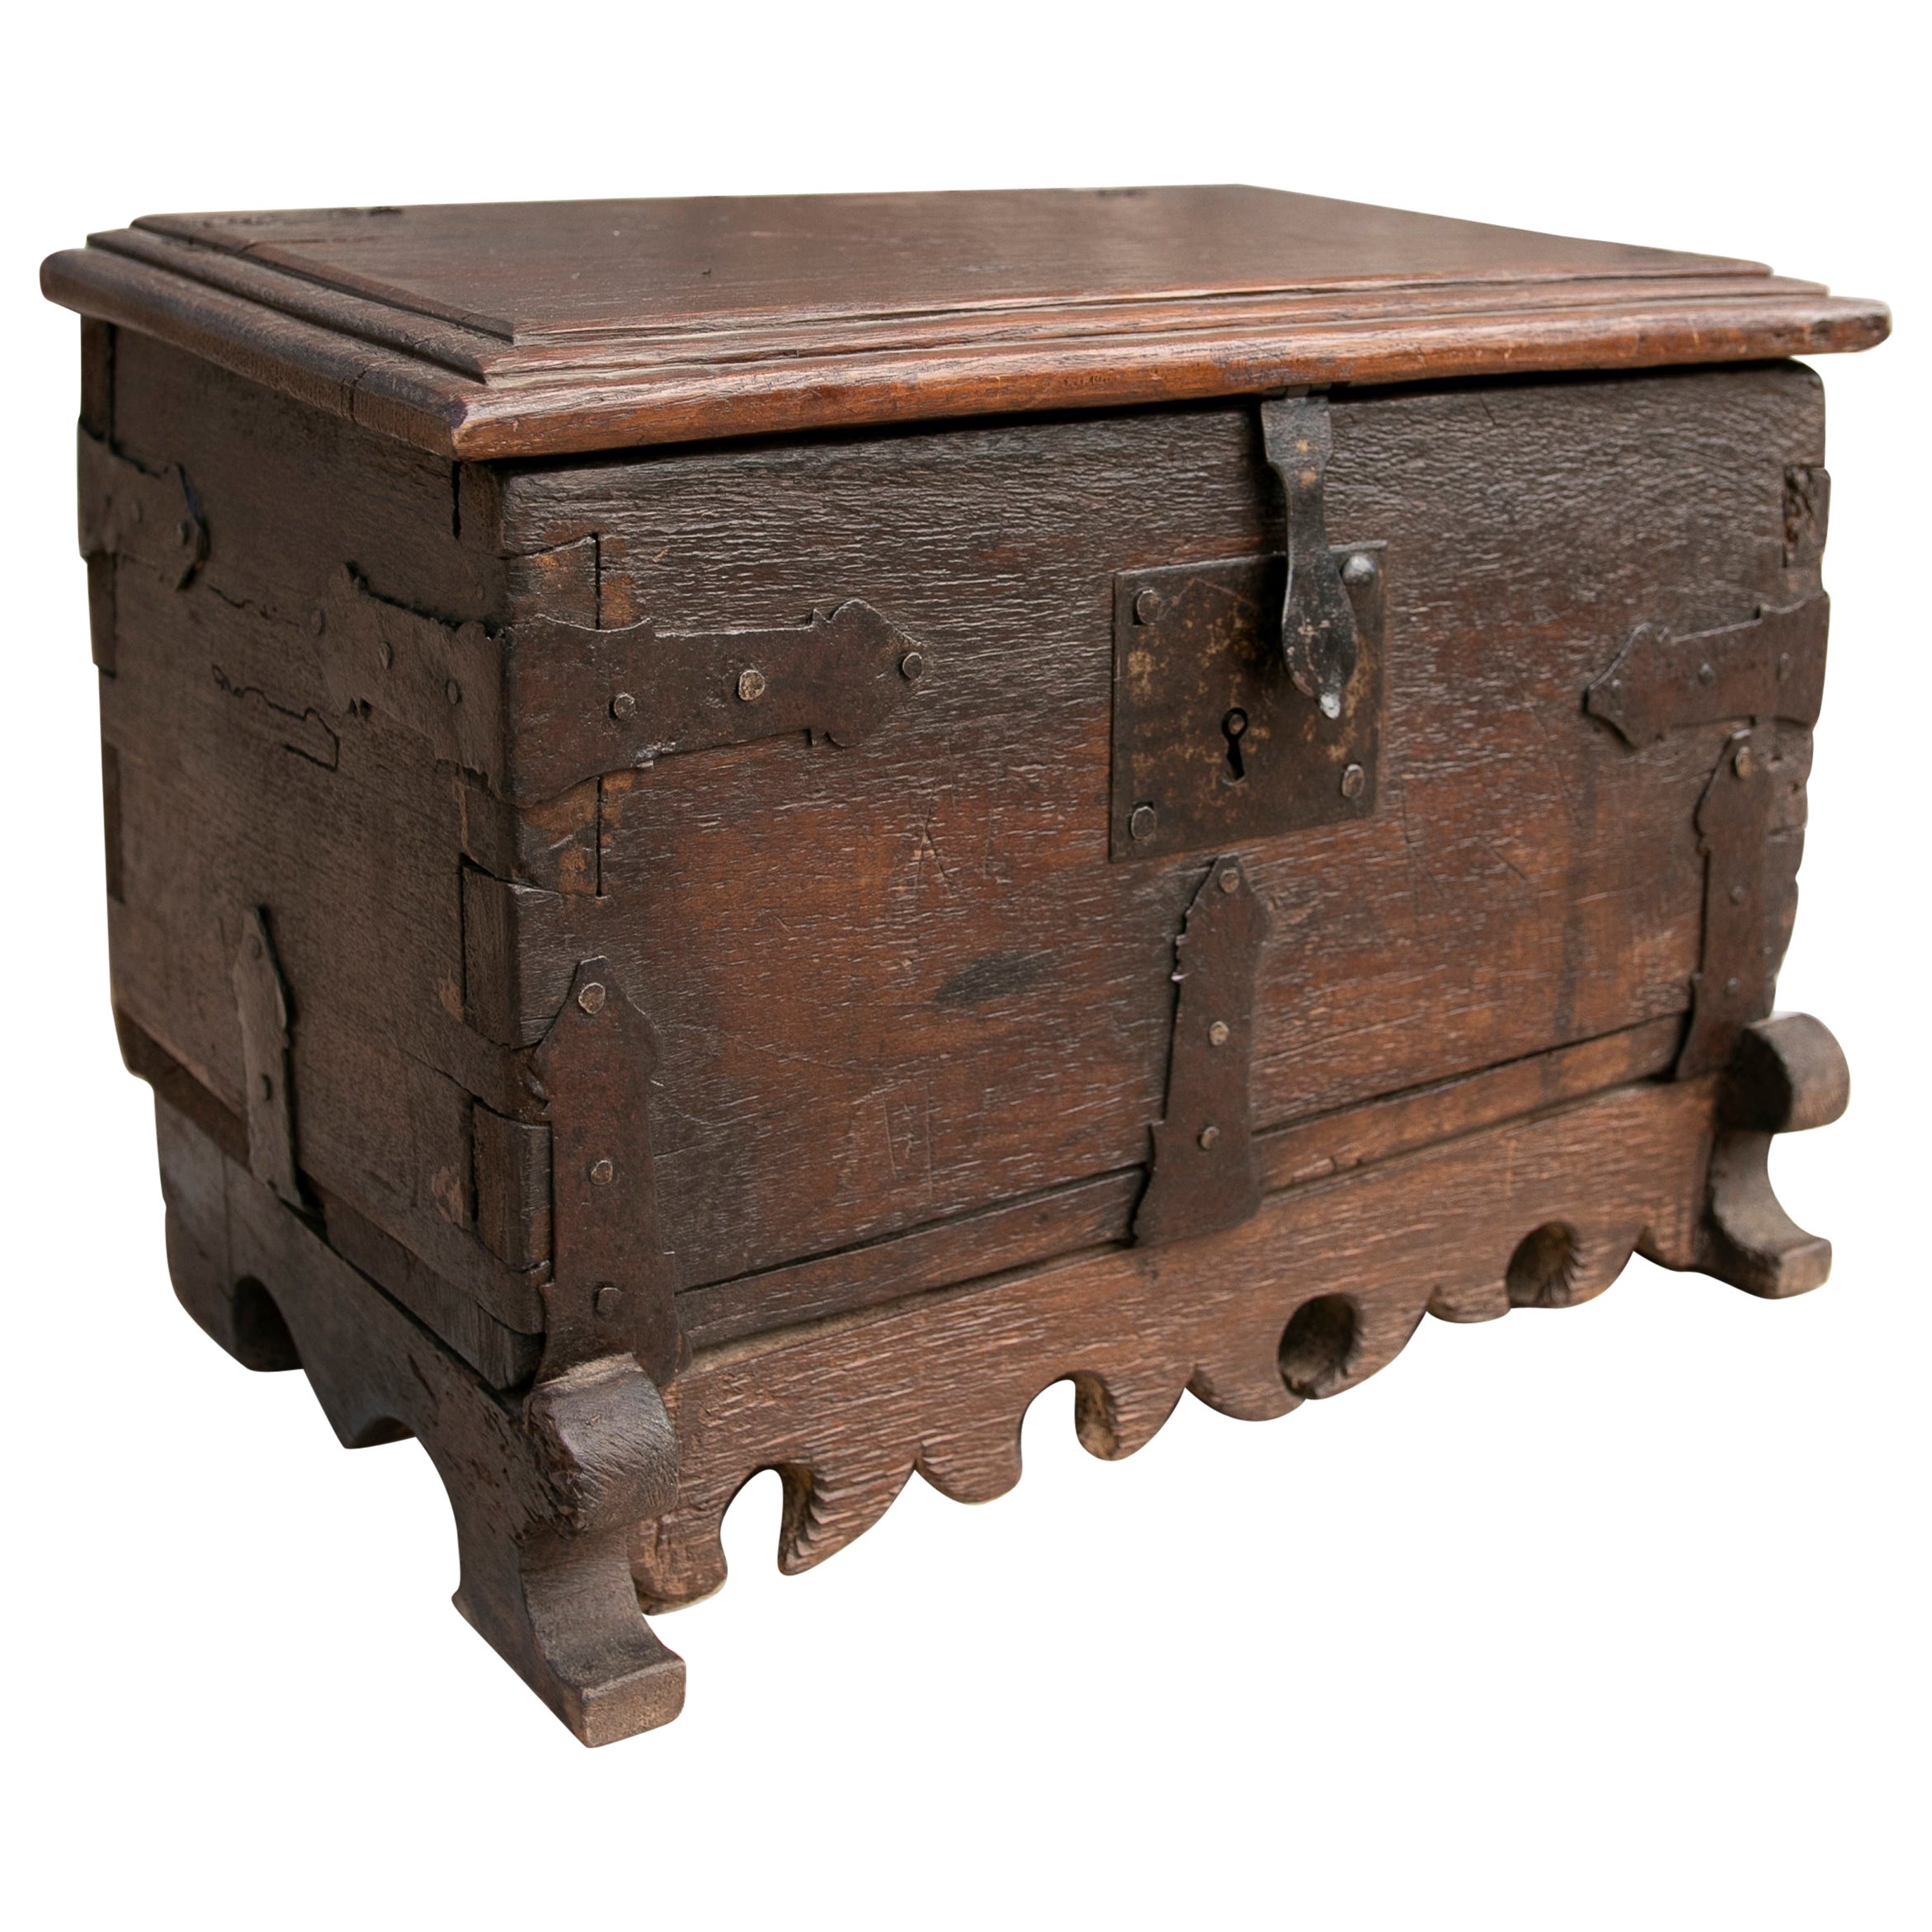 Spanish Wooden Chest with Original Iron Fittings